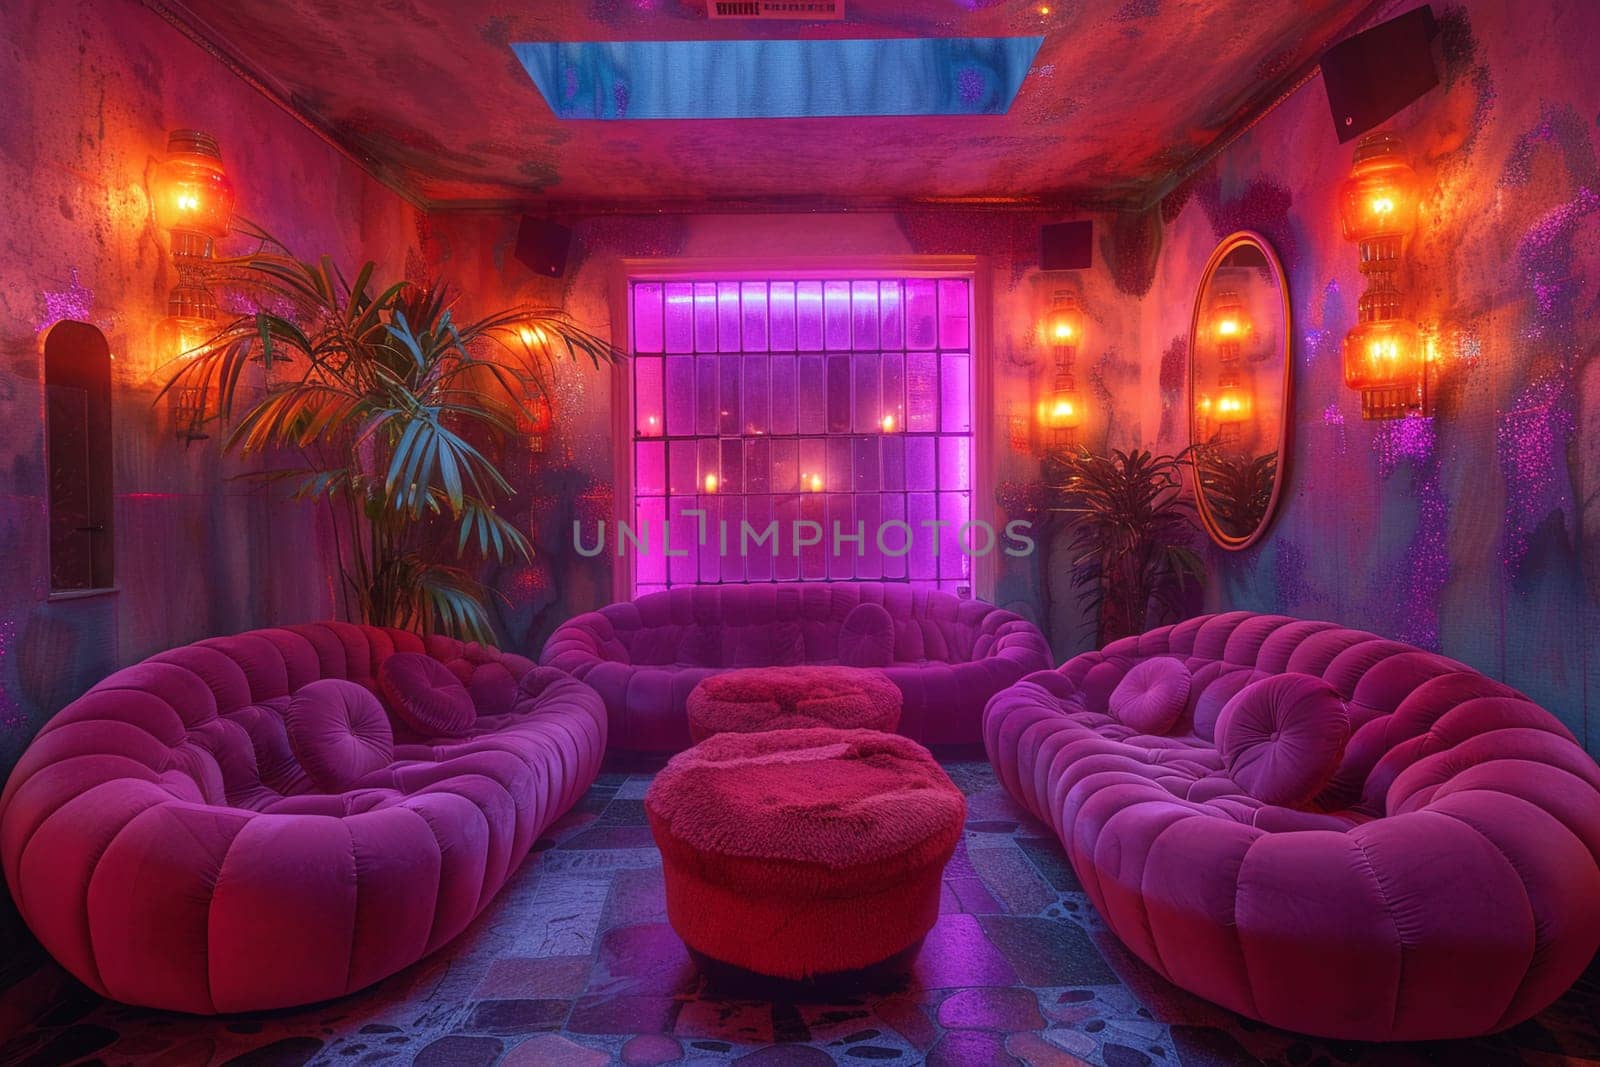 Chic cocktail lounge with velvet seating and mood lighting